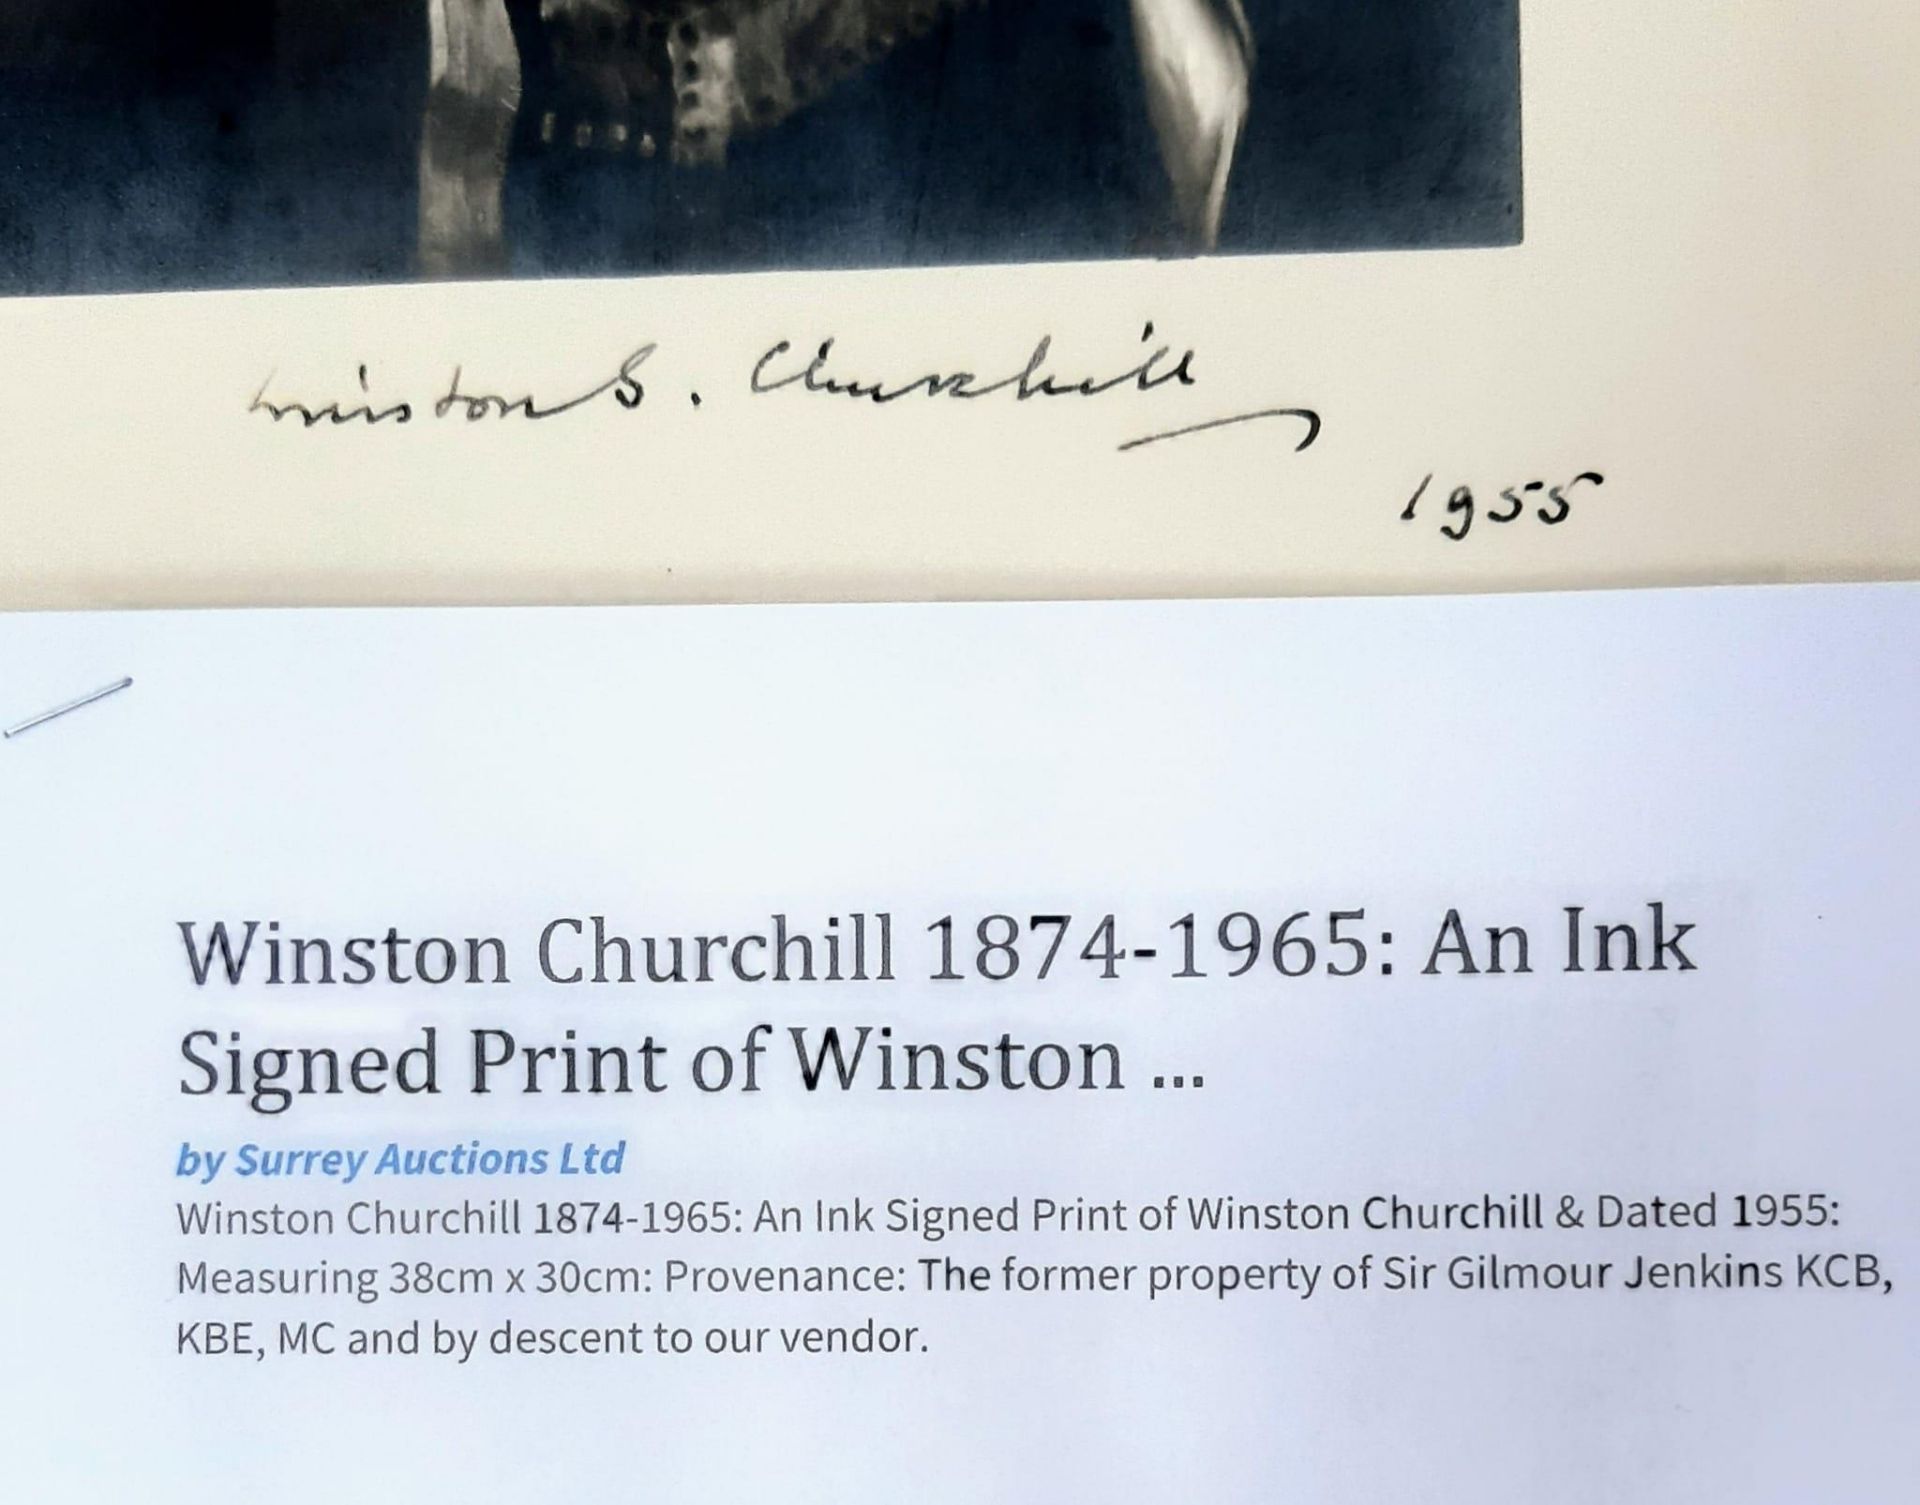 An Outstanding Condition Genuine Original Winston Churchill Ink Signed Portrait Image of Churchill - Image 2 of 2